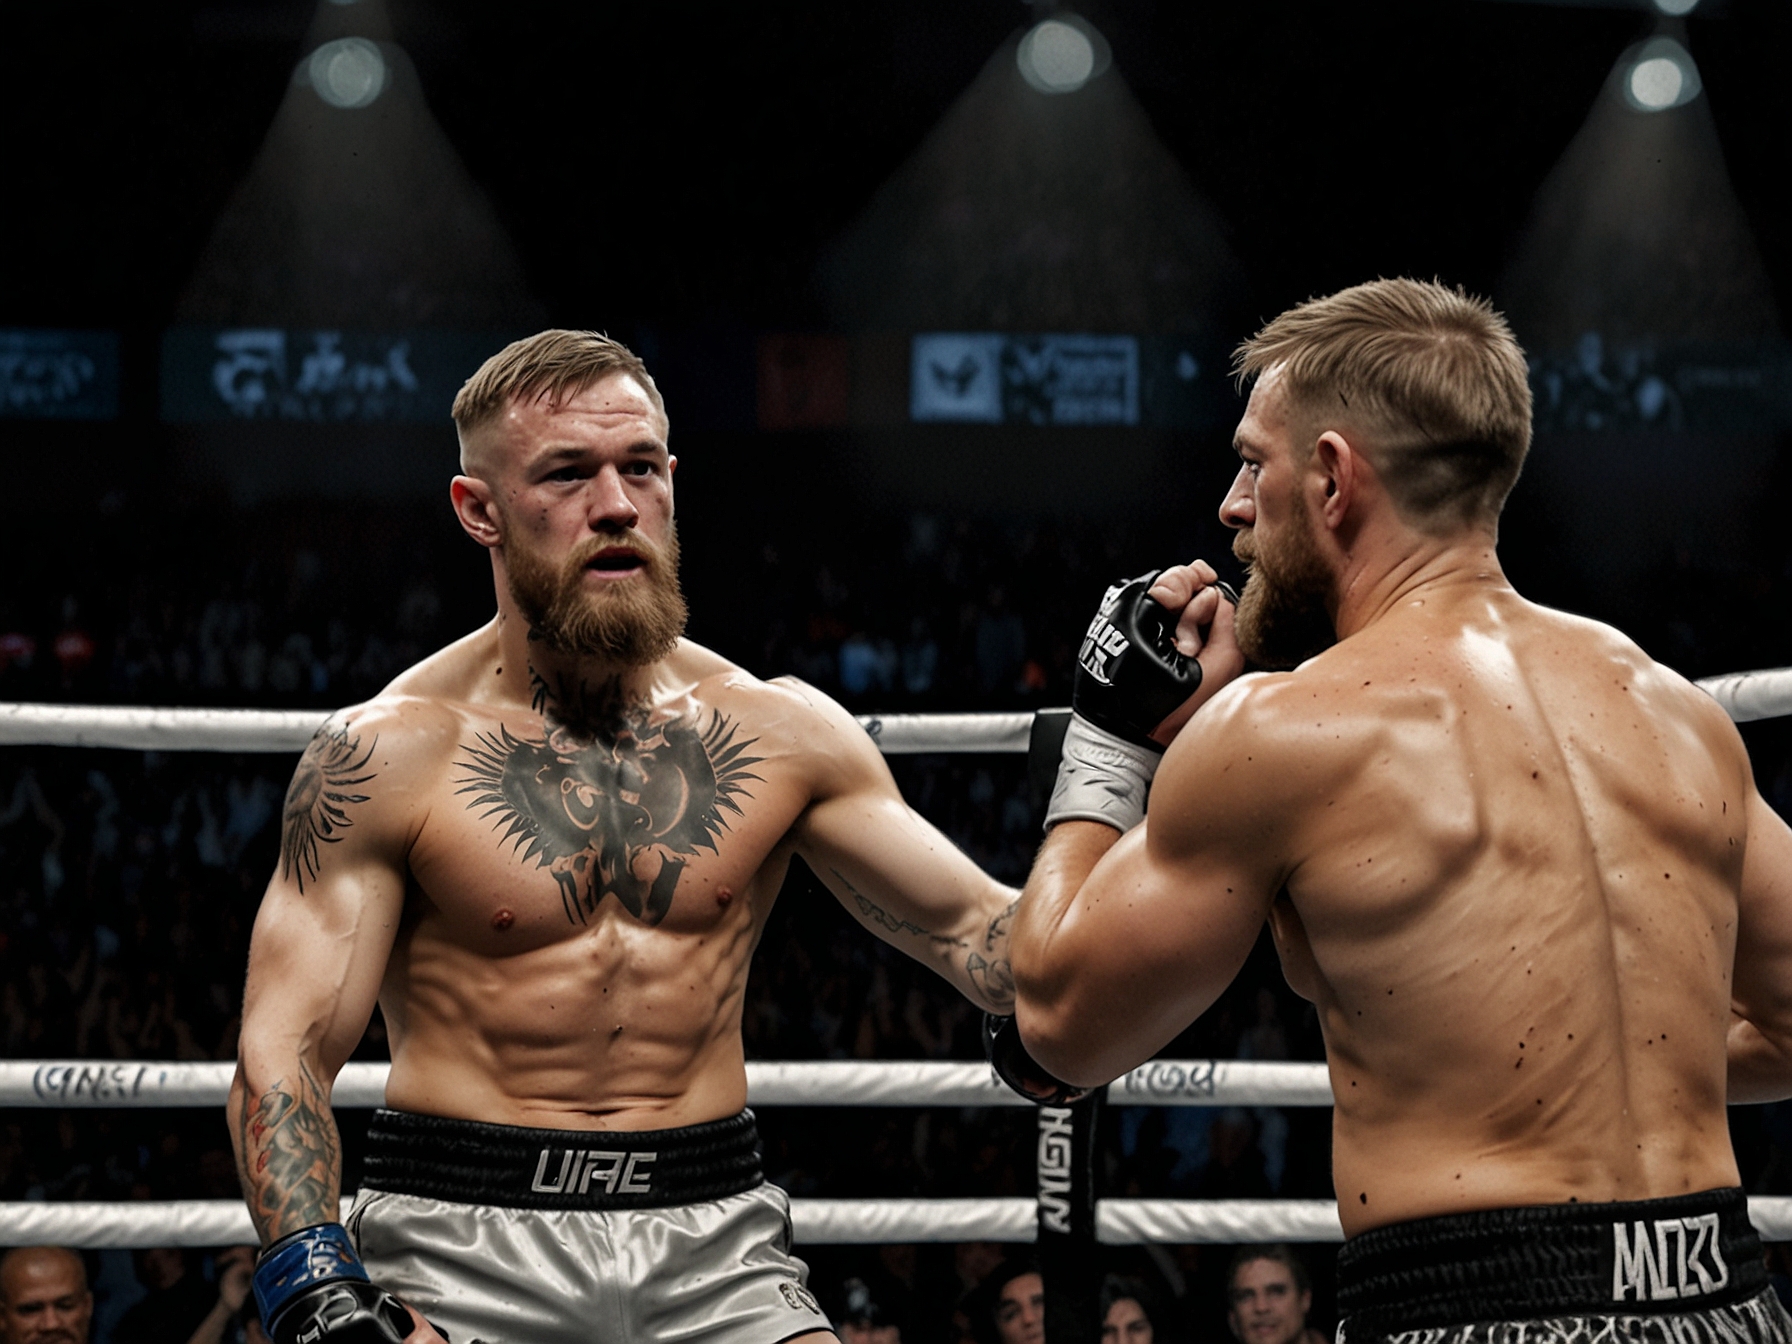 Conor McGregor in the ring, illustrating the drive and passion required in MMA, contrasted by his current financial status and its impact on his career decisions.